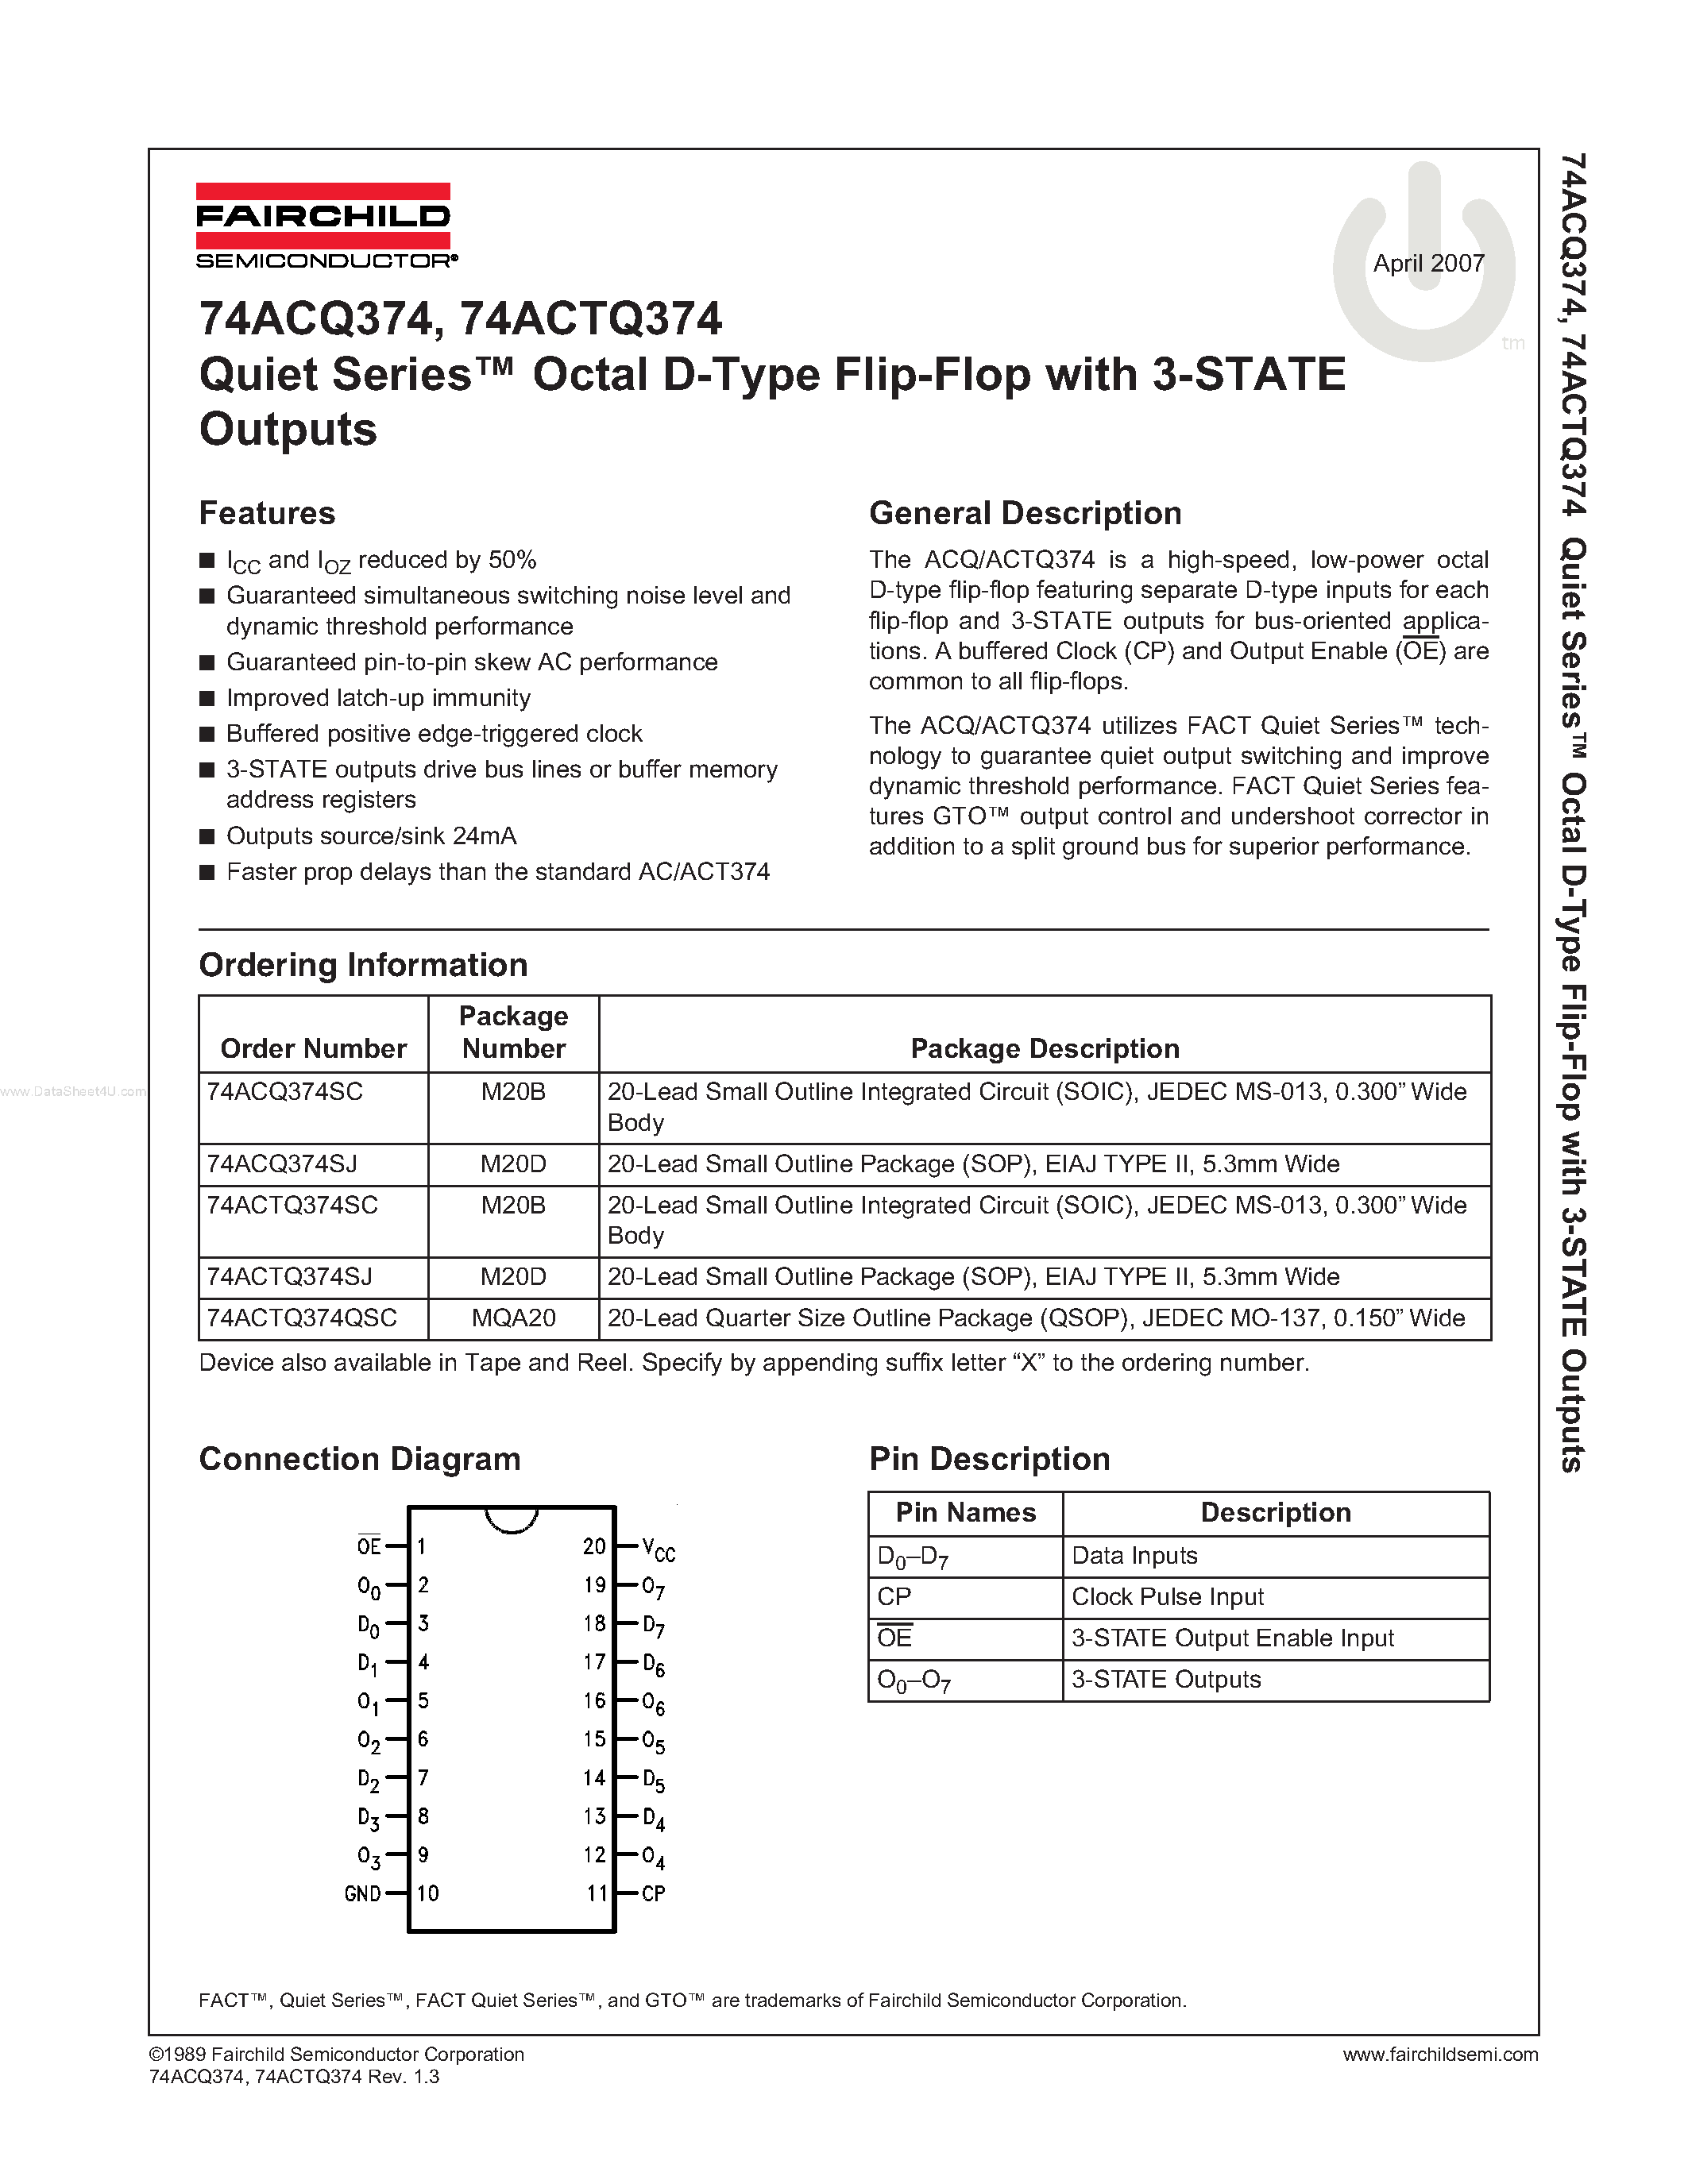 Datasheet 74ACQ374SC - Quiet Series Octal D-Type Flip-Flop with 3-STATE Outputs page 1